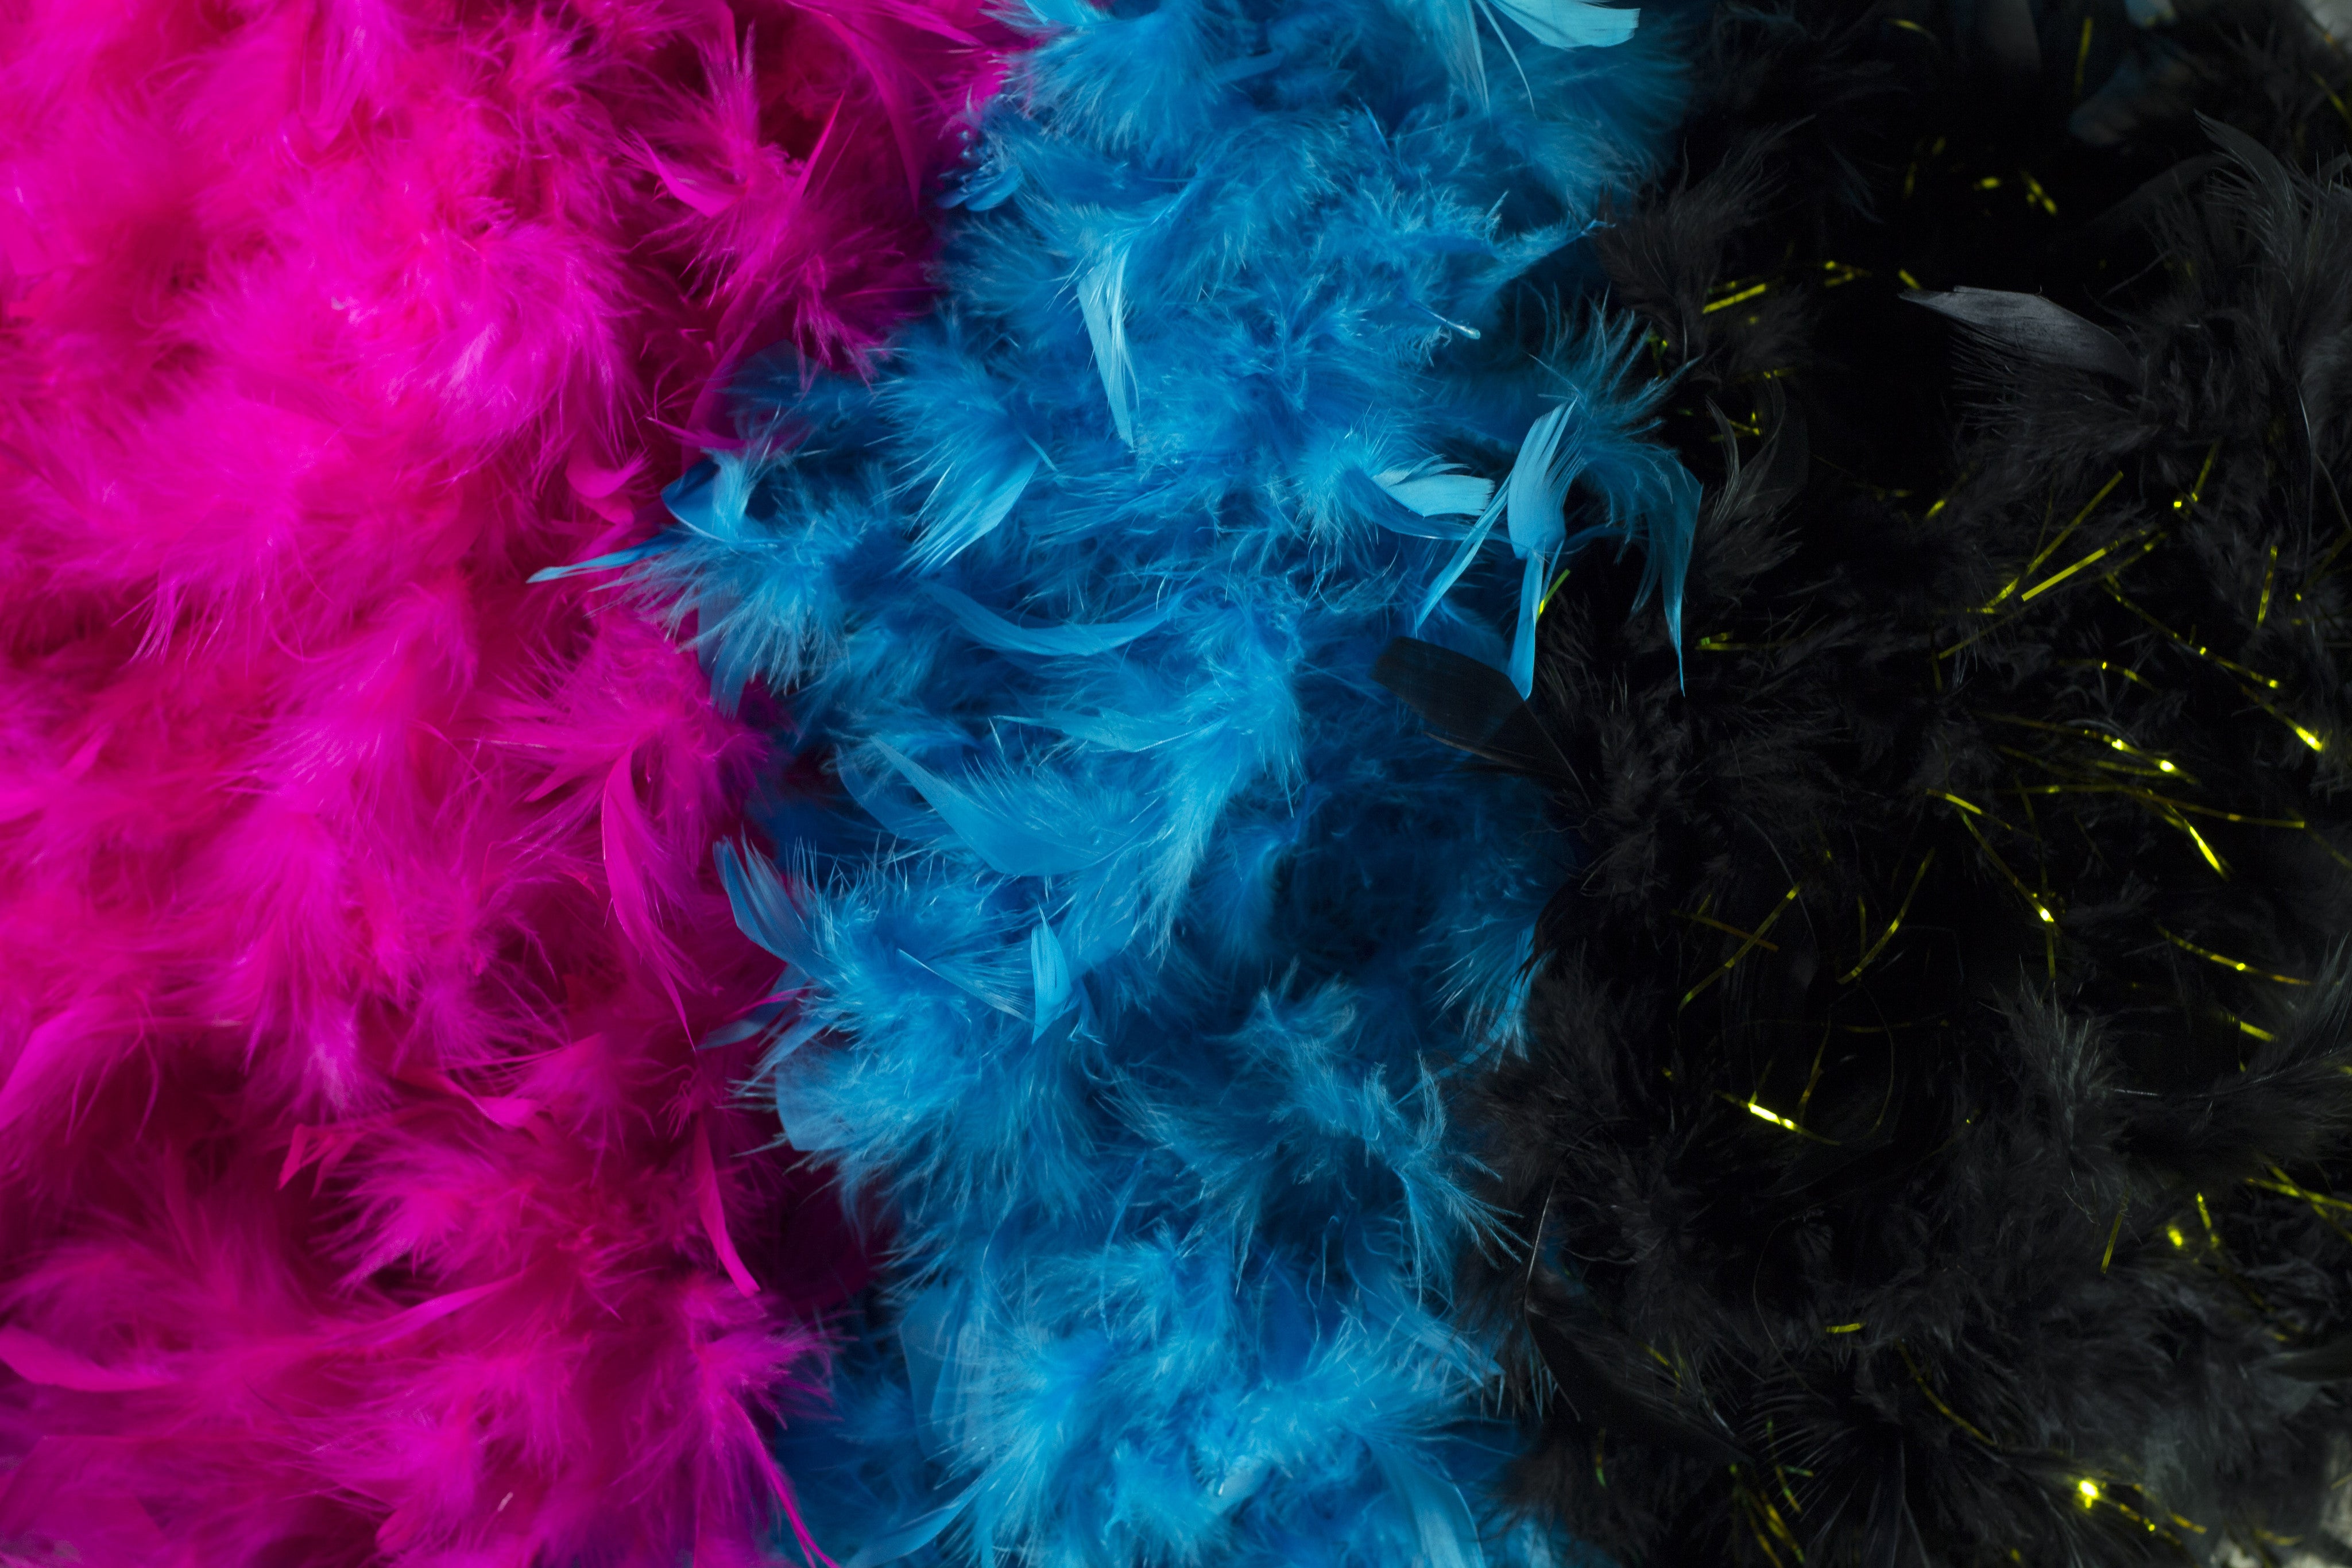 These Stunning Photos of Feathers Will Tickle Your Fancy